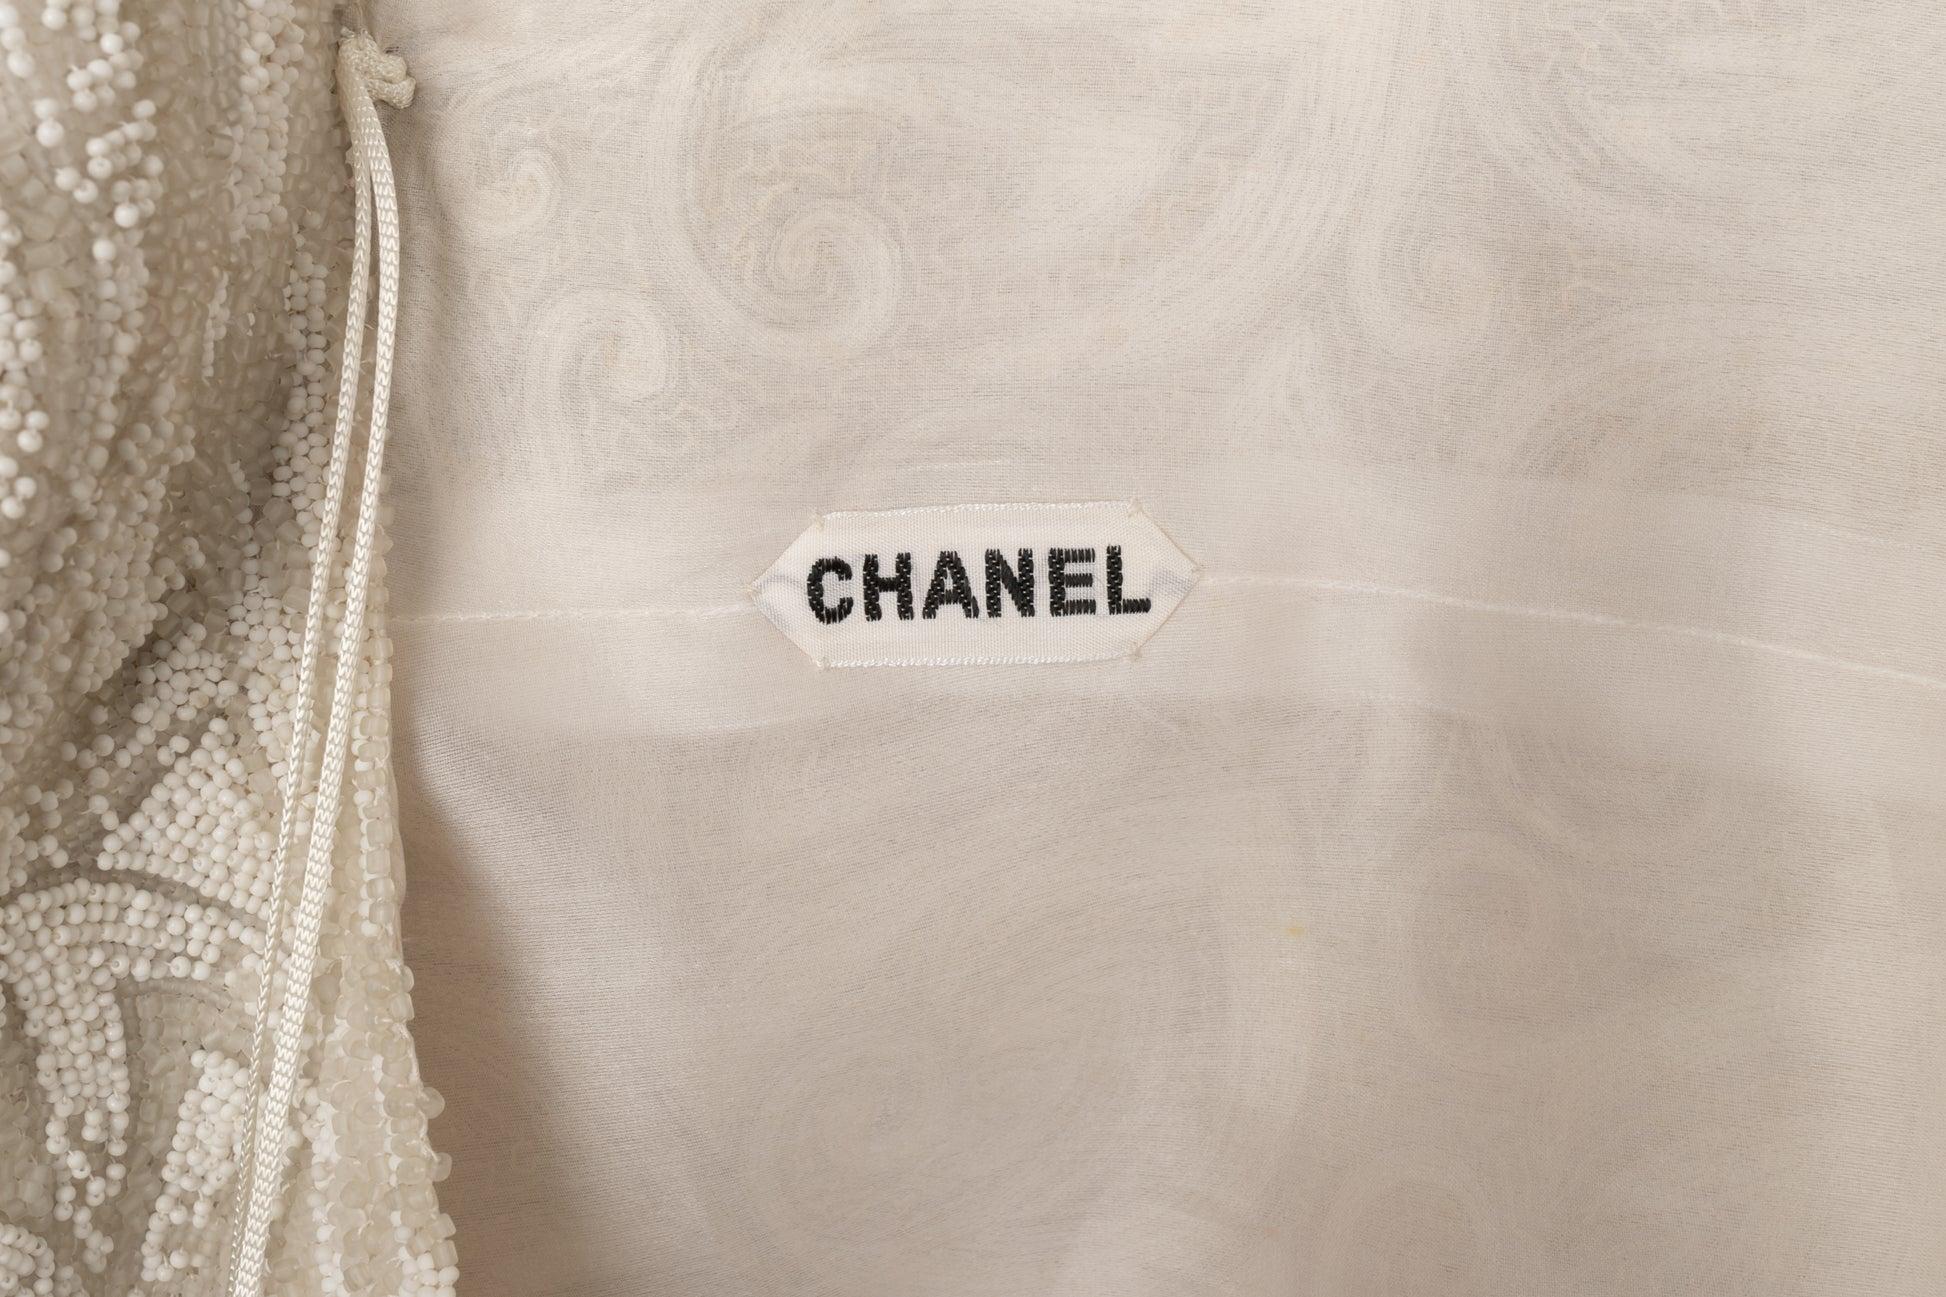 Chanel Haute Couture Set of Blouse with Crepe Skirt, 1994 For Sale 5